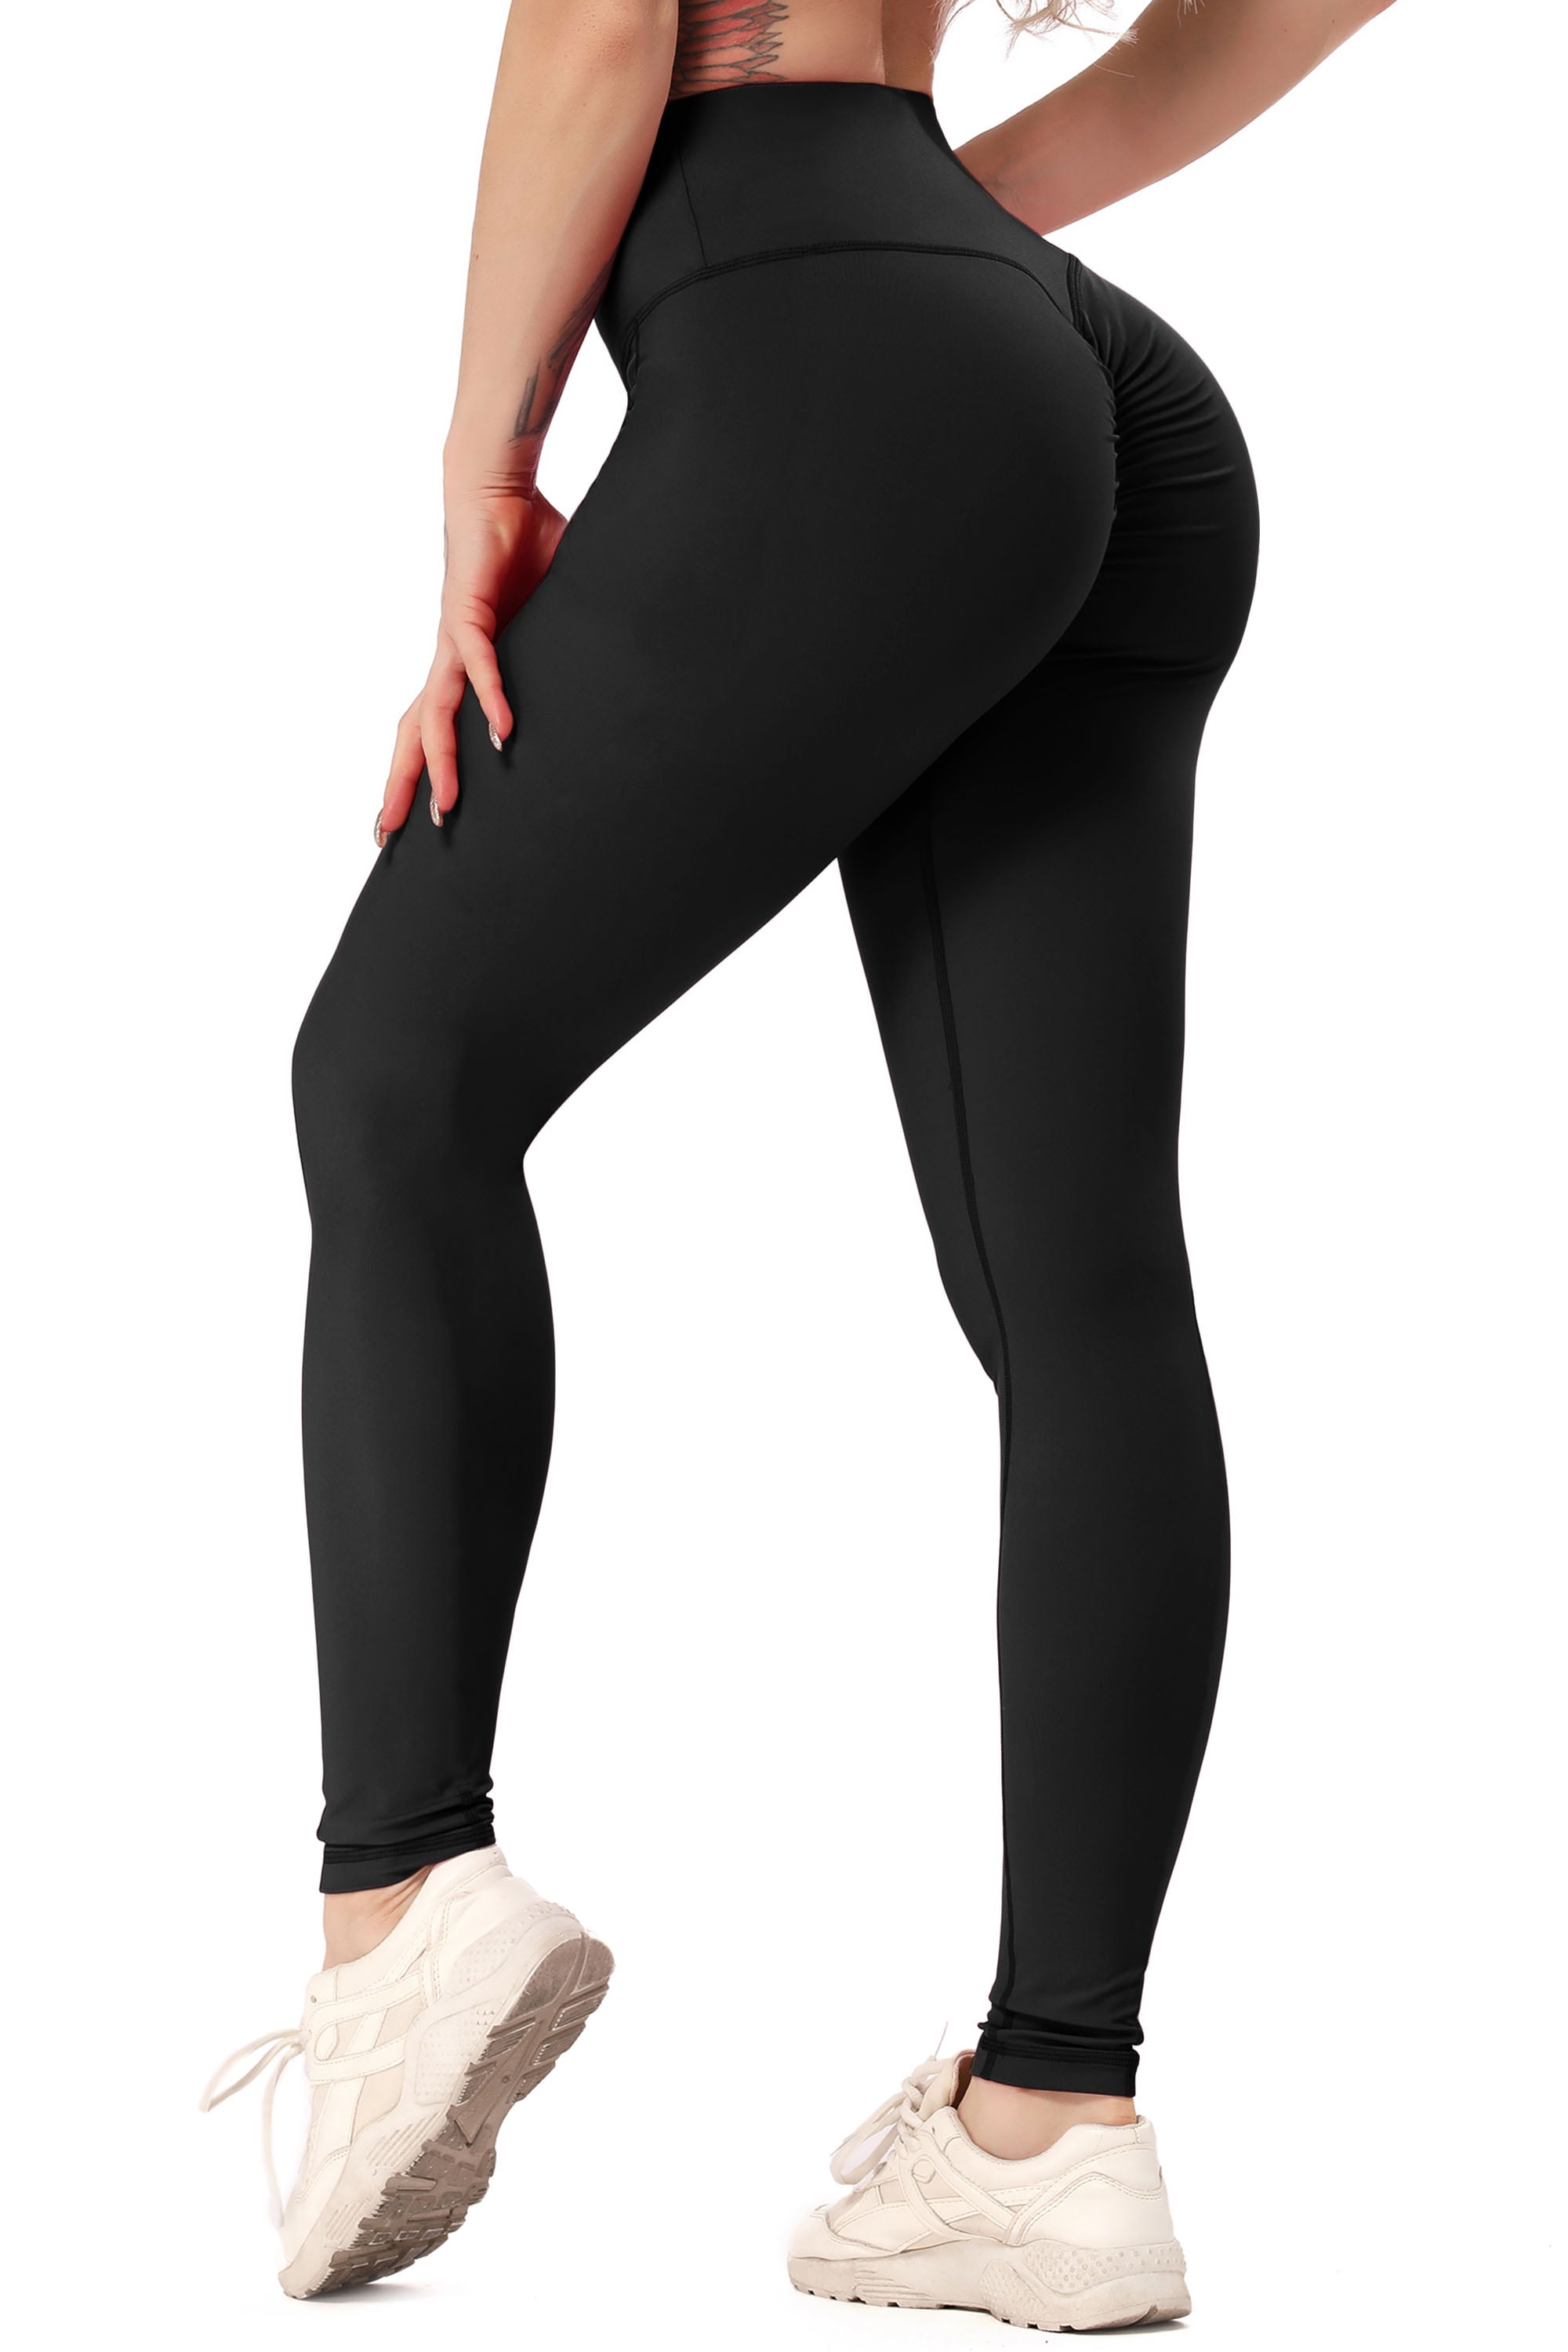 FITTOO Women Anti-Cellulite Yoga Pants Scrunch Leggings Ruched Sport Gym Fitness 